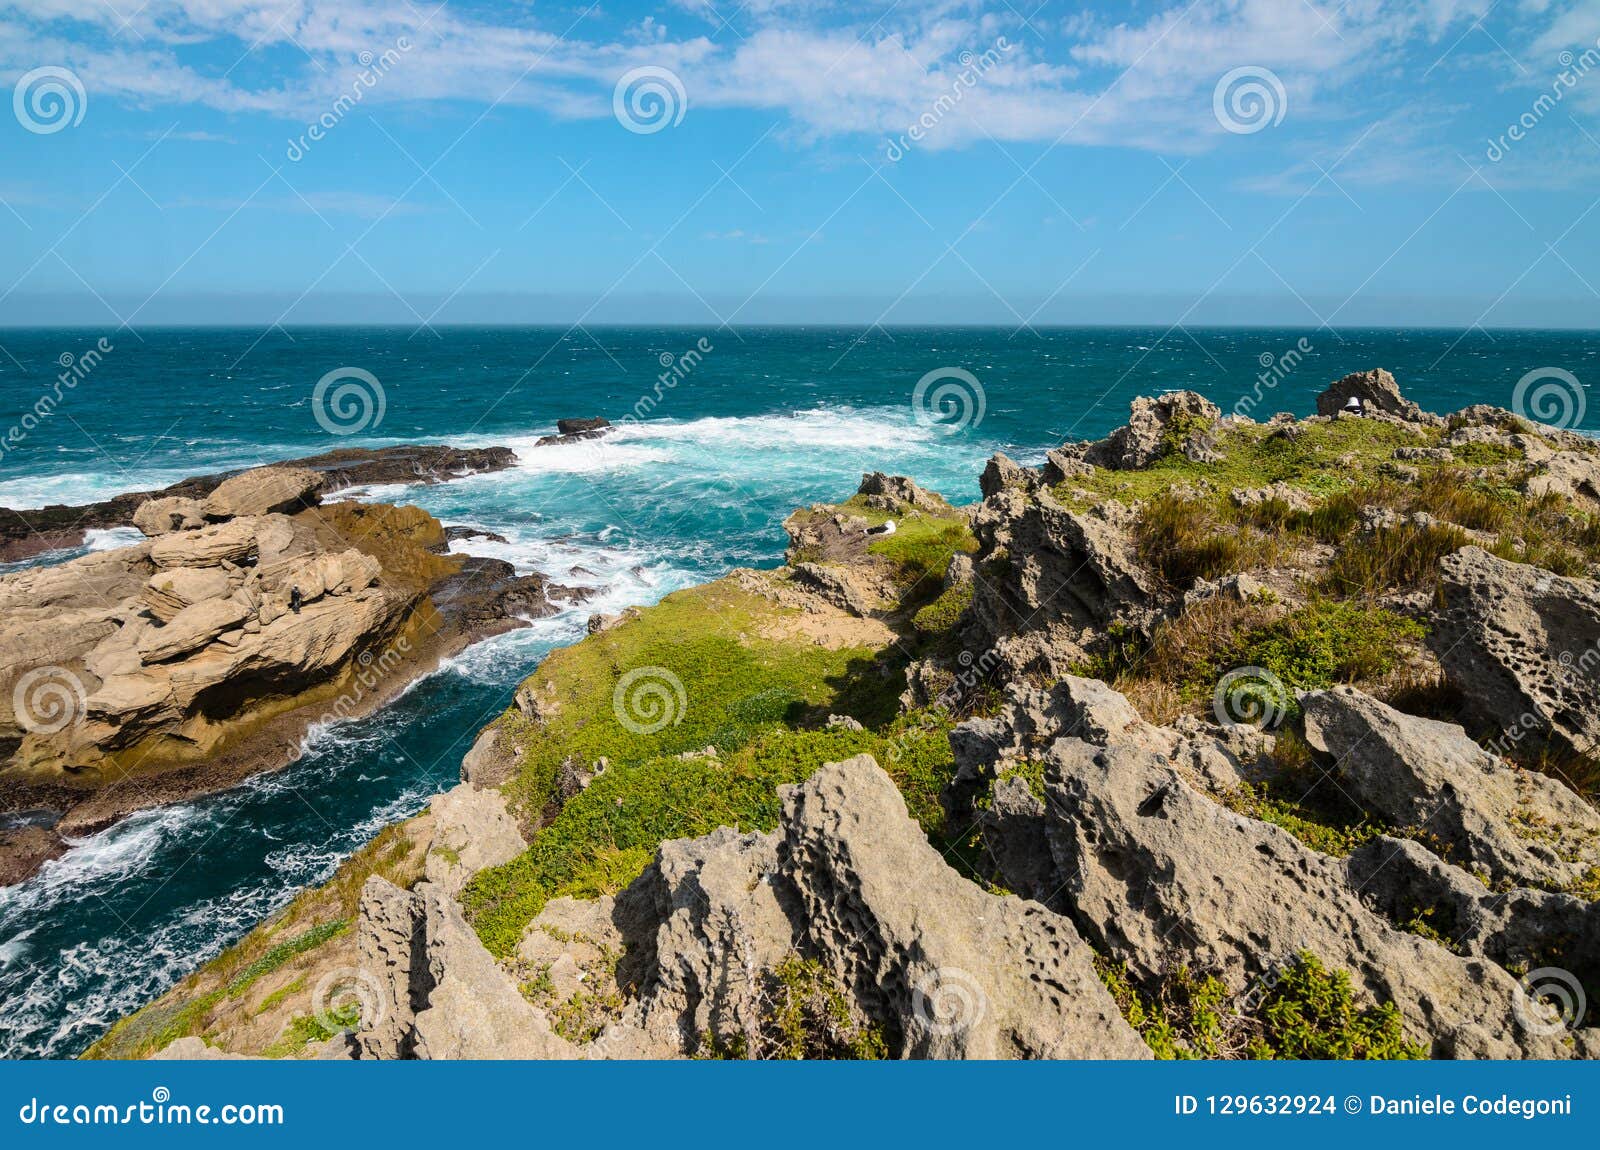 Robberg Peninsula Robberg Nature Reserve Landscape Indian Ocean Waves South Africa Garden Route Stock Photo Image Of Experience Blue 129632924